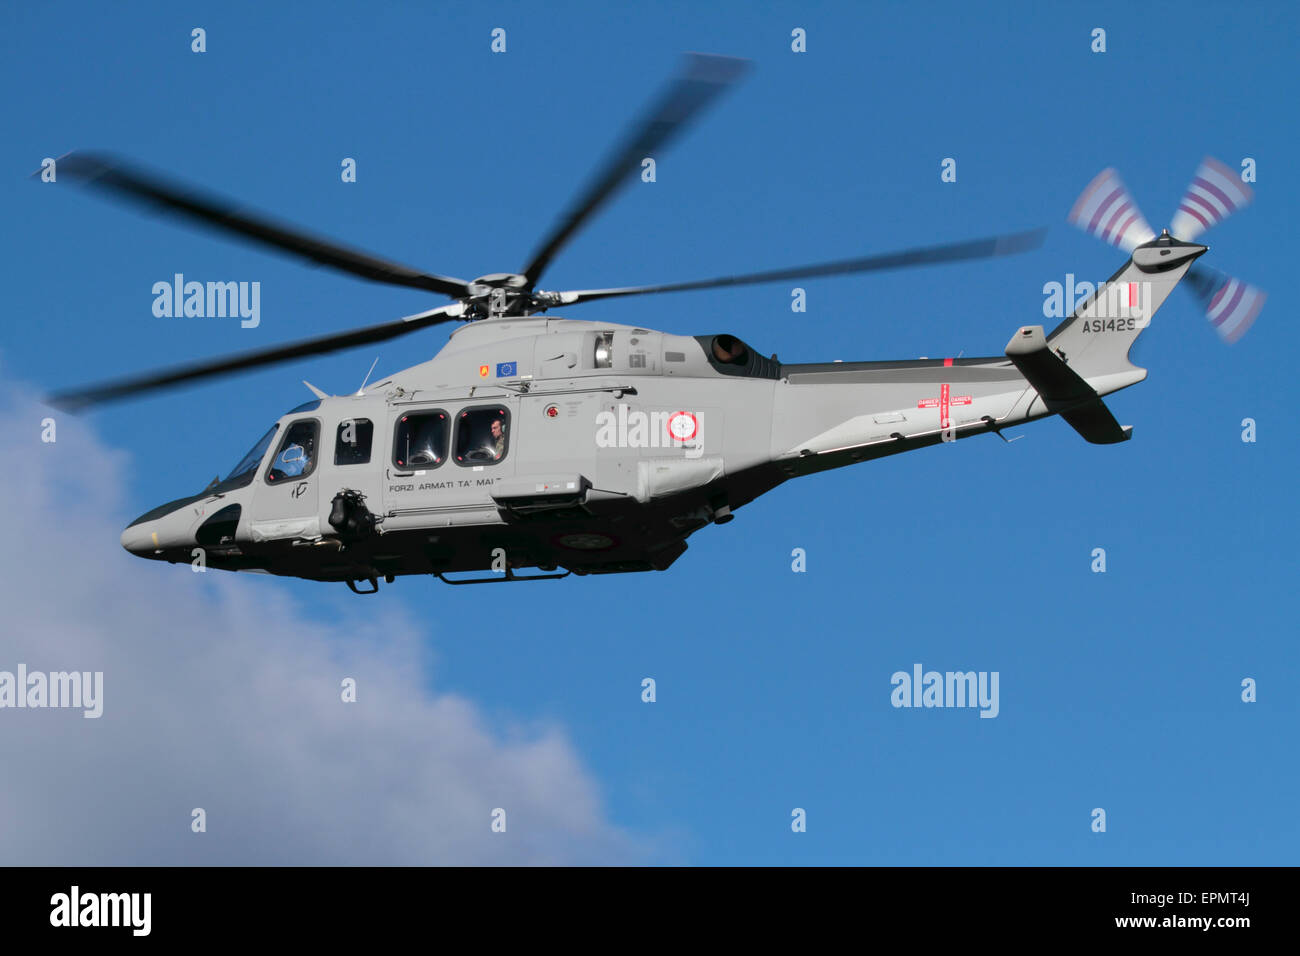 AgustaWestland (Leonardo) AW139 maritime patrol / search and rescue helicopter of the Armed Forces of Malta flying in the sky with wheels up Stock Photo